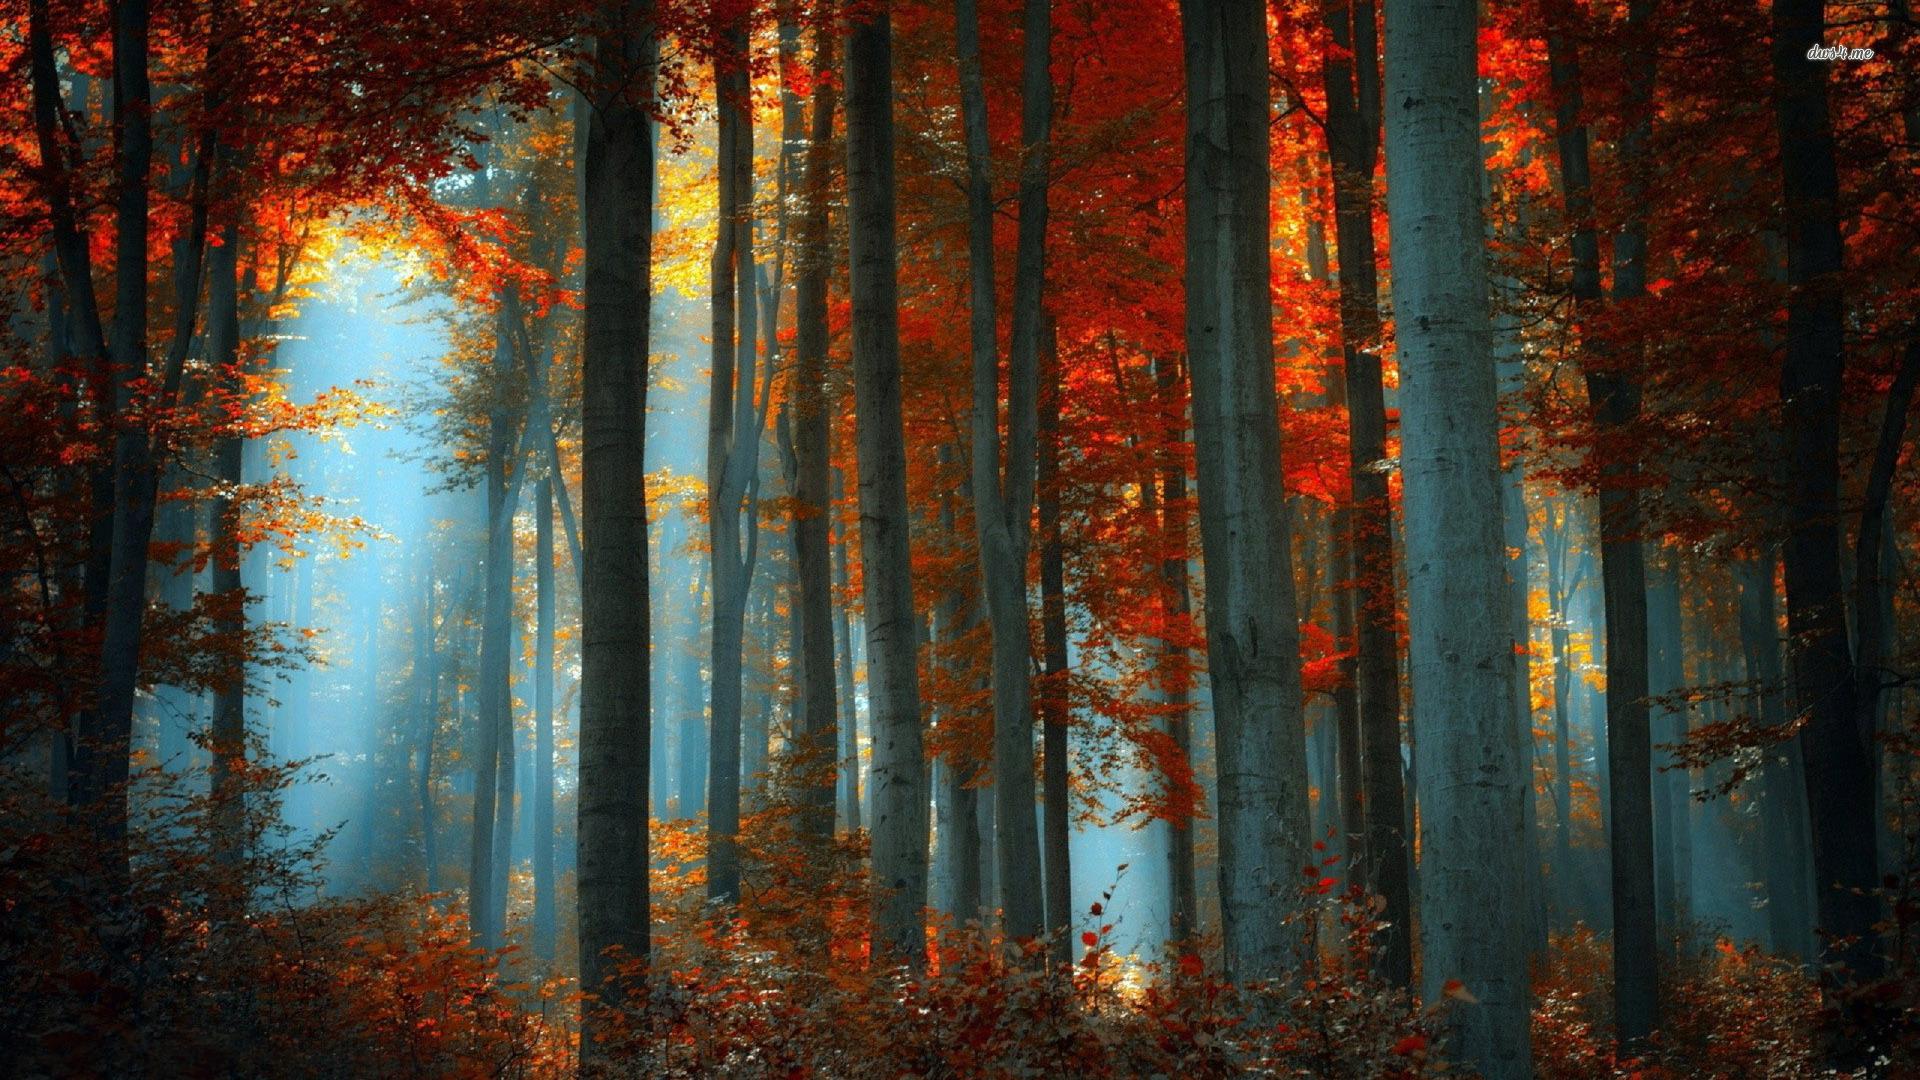 A forest with trees and leaves in the background - Fall, woods